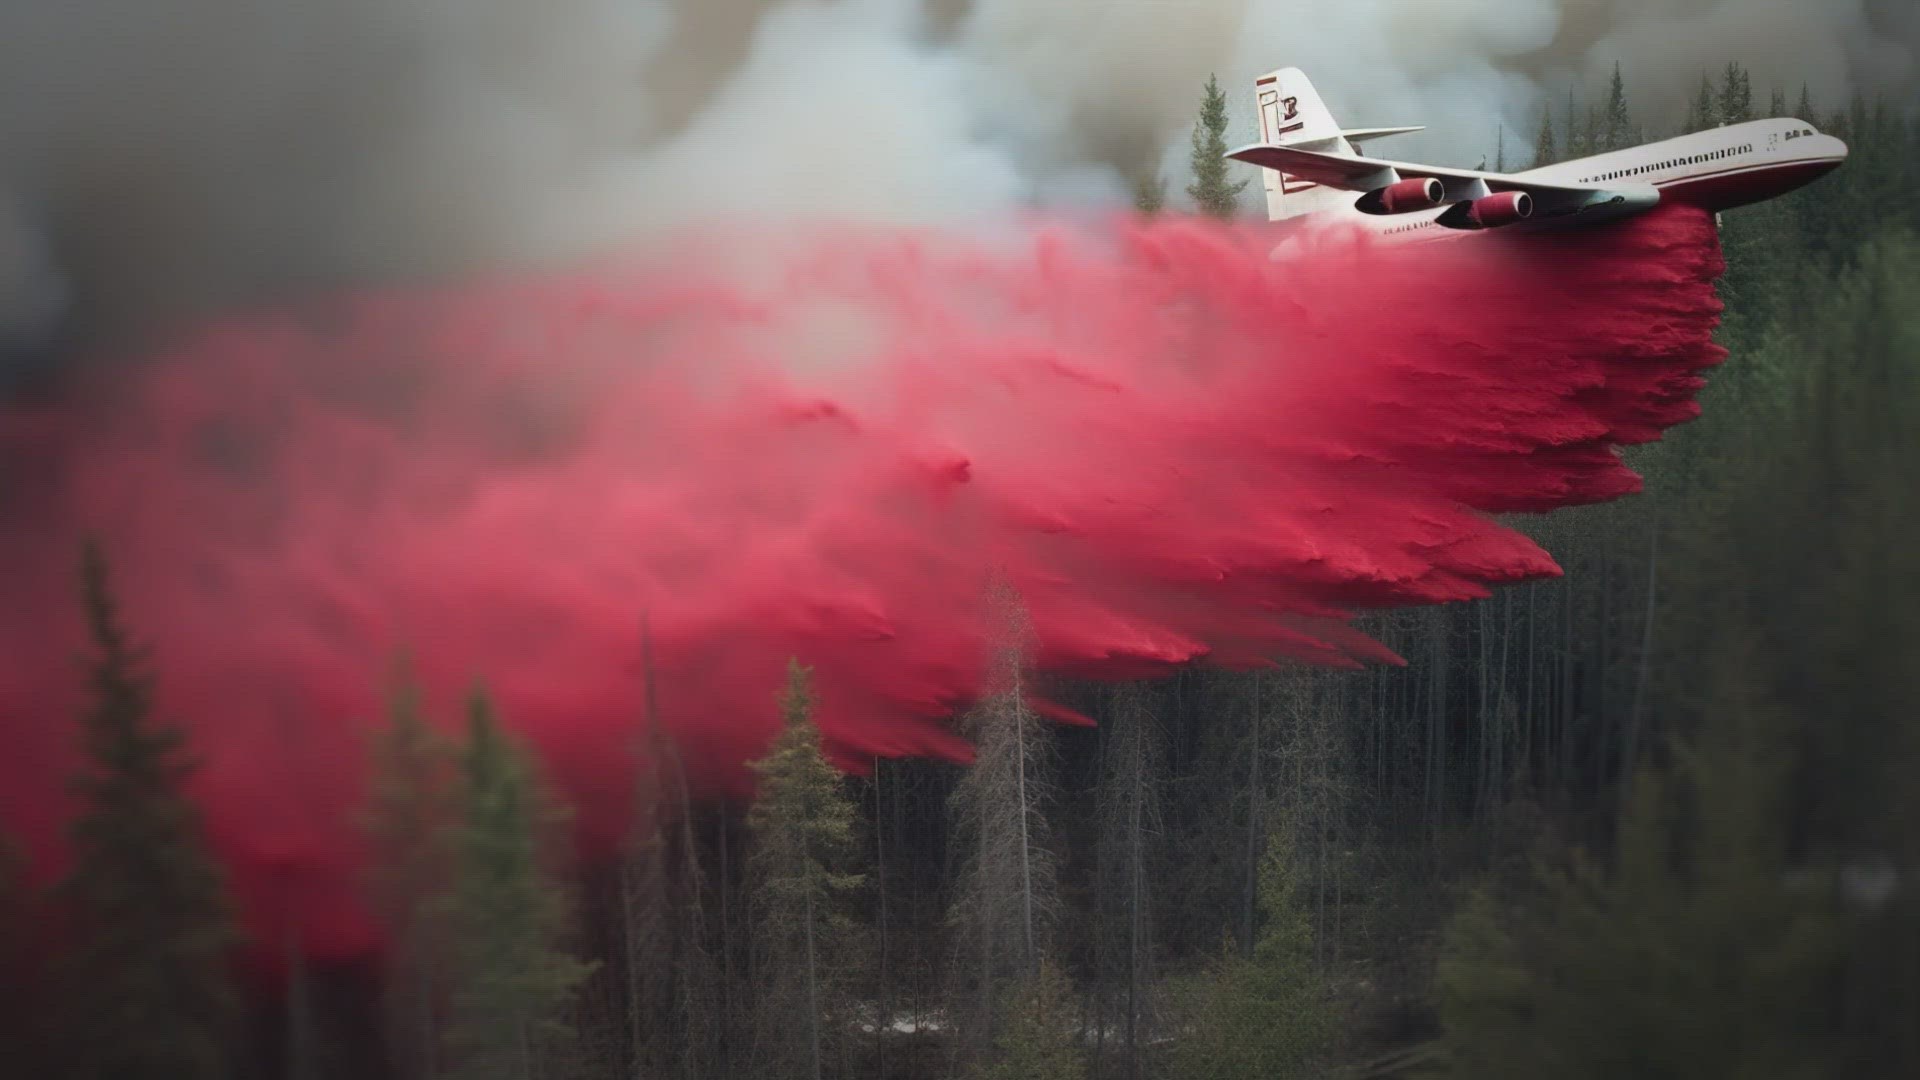 With wildfire seasons getting longer and hotter, the U.S. Forest Service says dropping fire retardant is a key tool, but the red chemical is lethal to aquatic life.